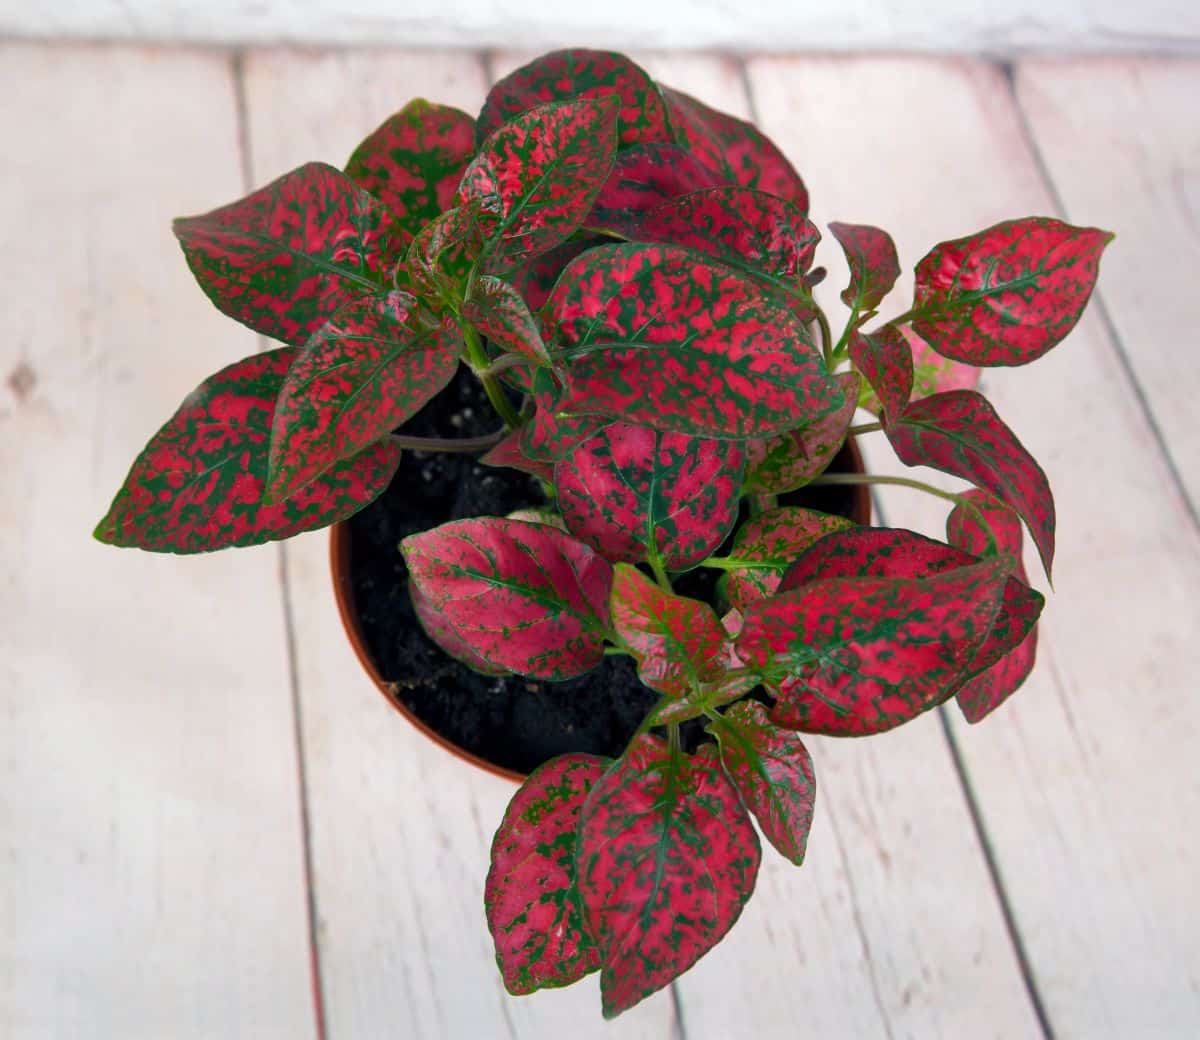 Polka Dot Plant with beautiful green-red leaves growing in a pot.